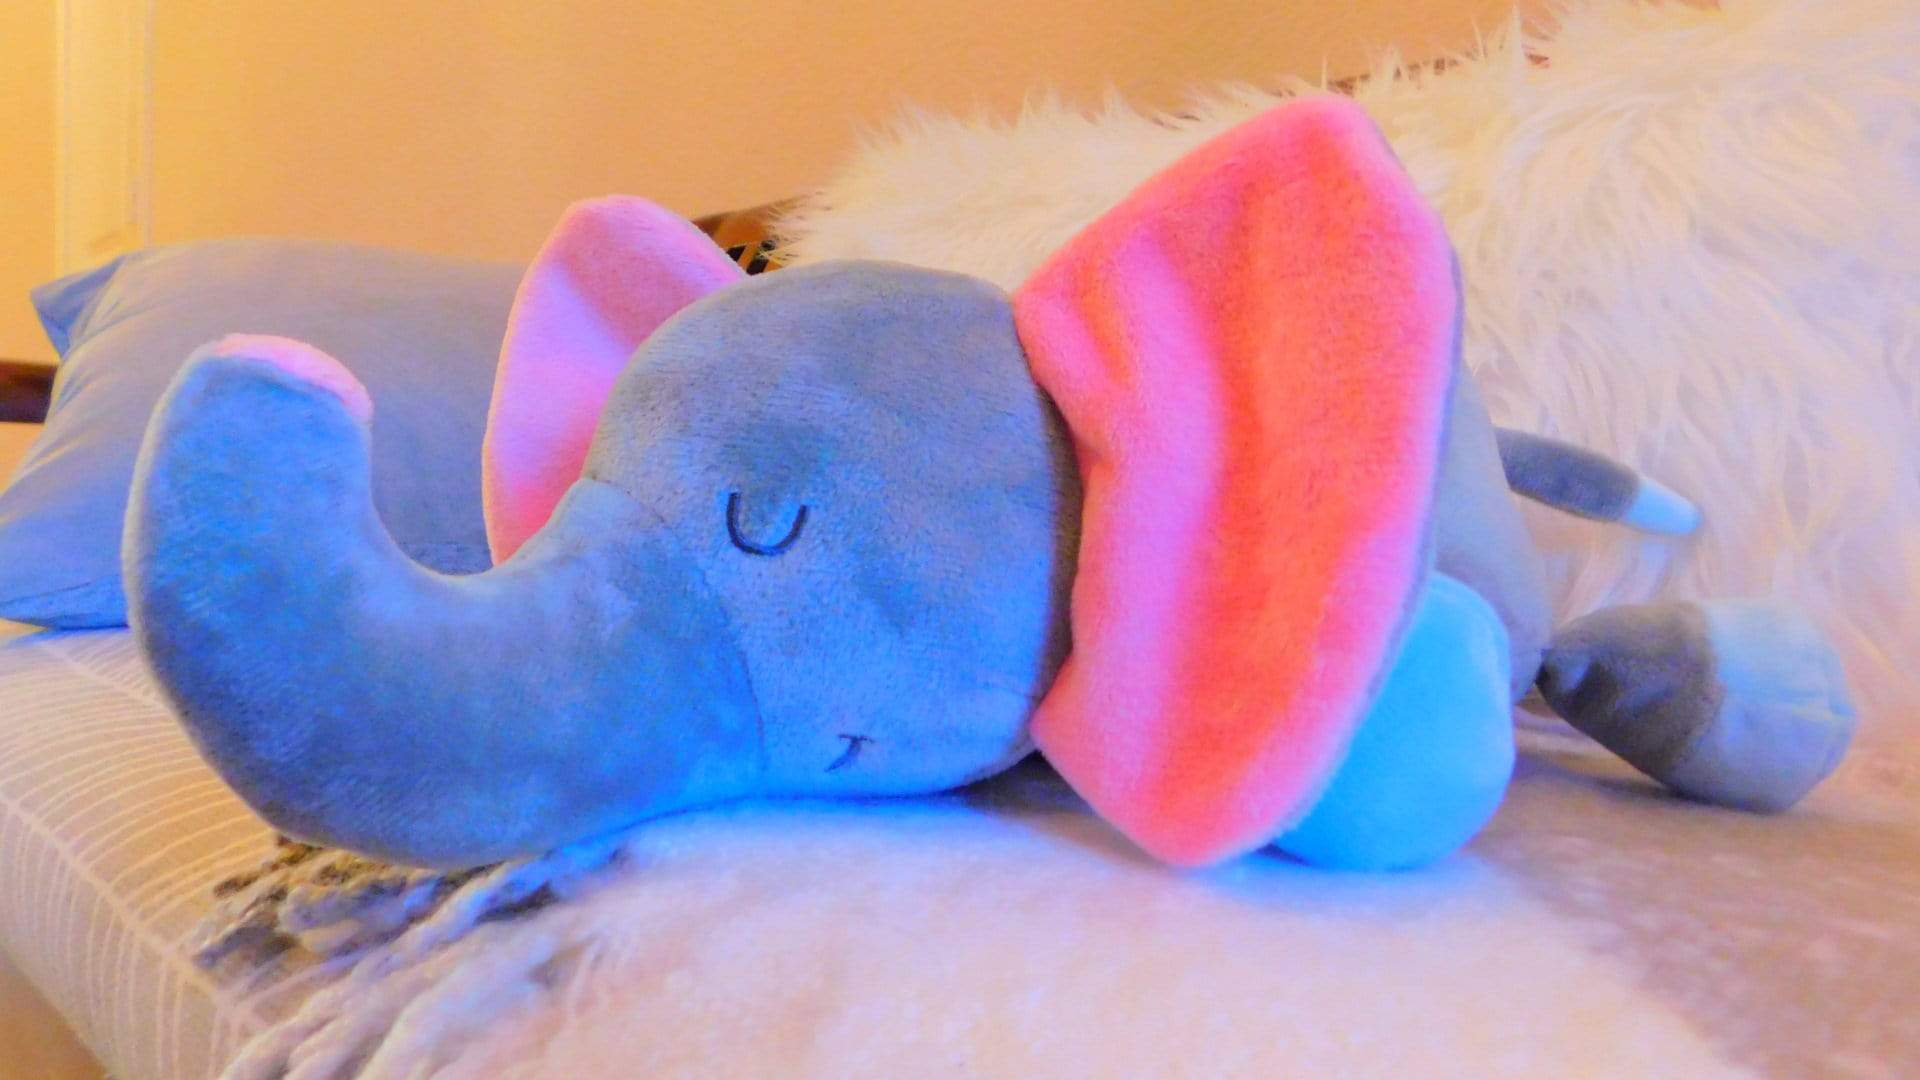 Soothing Elephant with Light & Sound - Plush Elephant for Baby Baby Projector with Sound